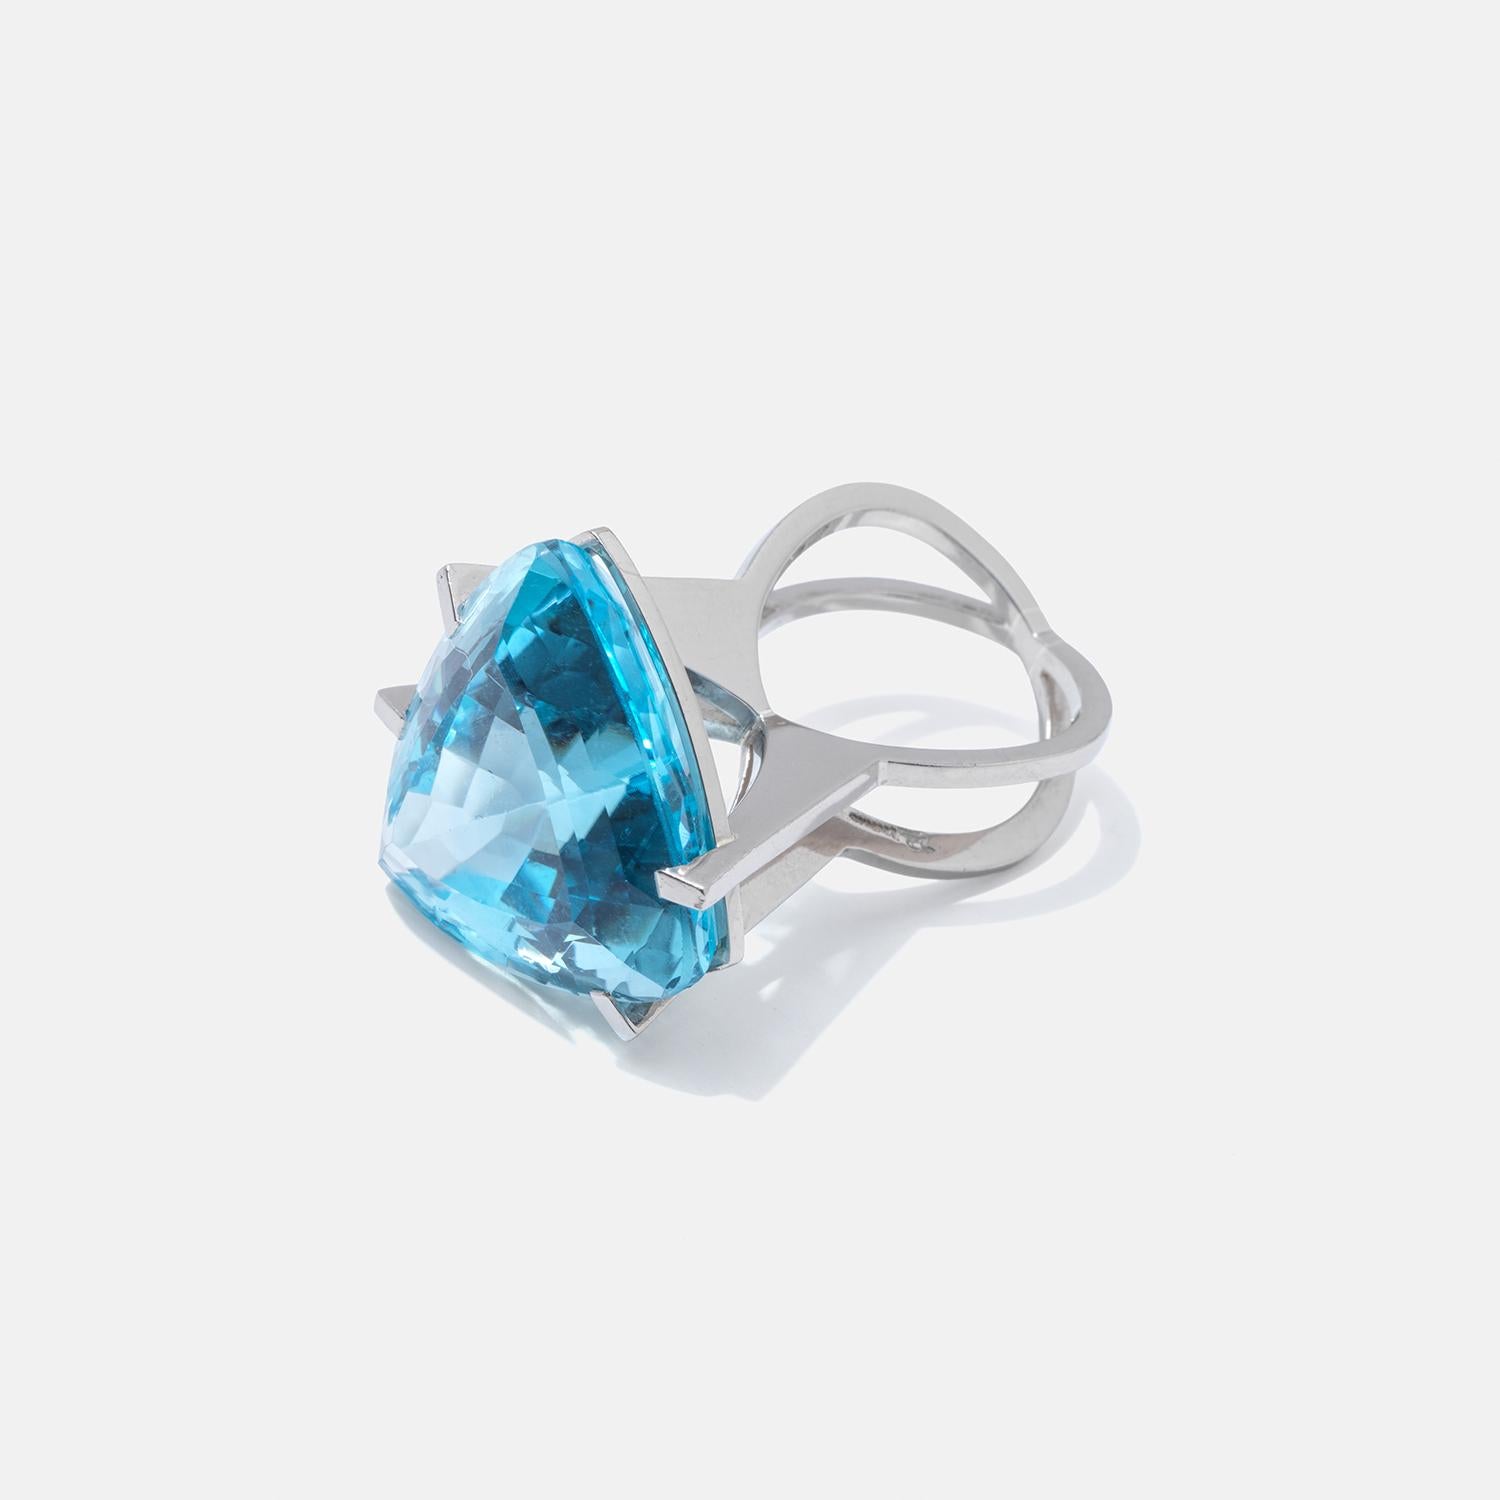 This 18 karat white gold ring features a prominently large blue topaz, boasting an intense shade of azure that catches the eye. The gemstone is cut in a triangular shape, adding a unique geometric appeal to the piece. Its substantial size and bold